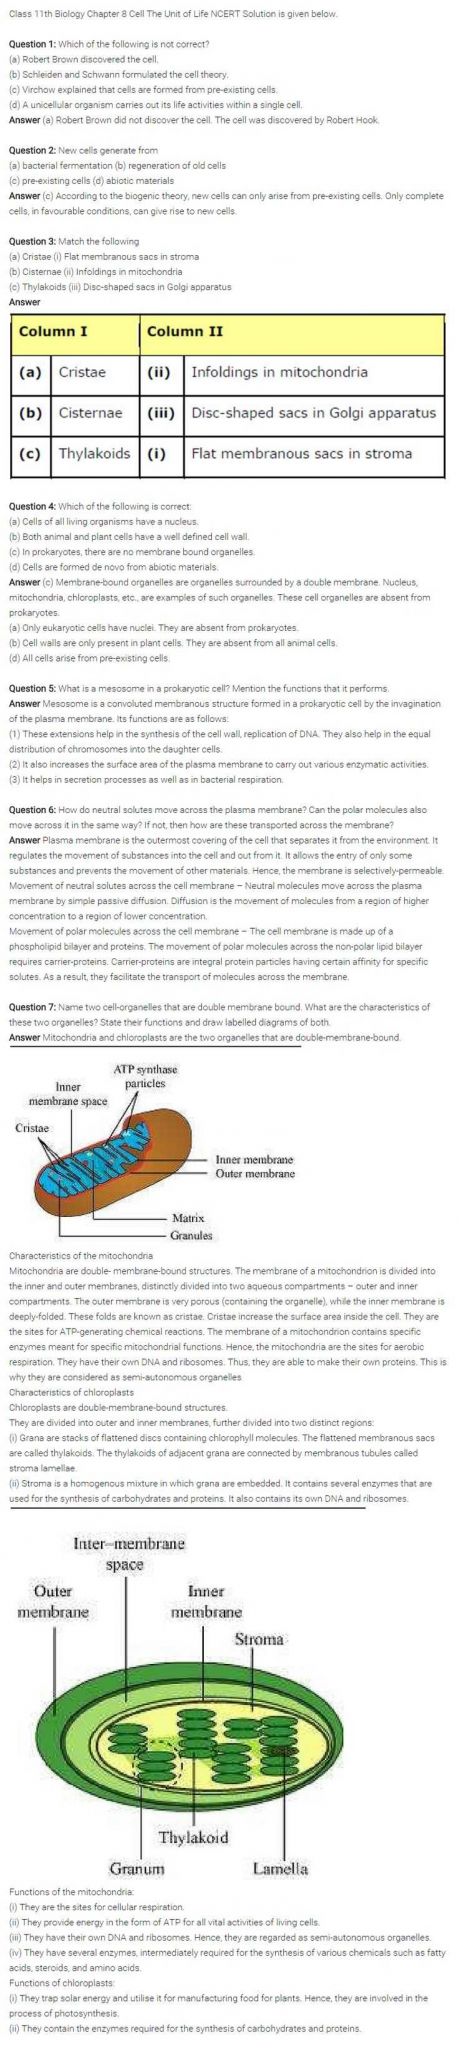 Chapter 7 Section 4 Cellular Transport Worksheet Answers Along with 23 Best Cbse Class 11 Biology Images On Pinterest